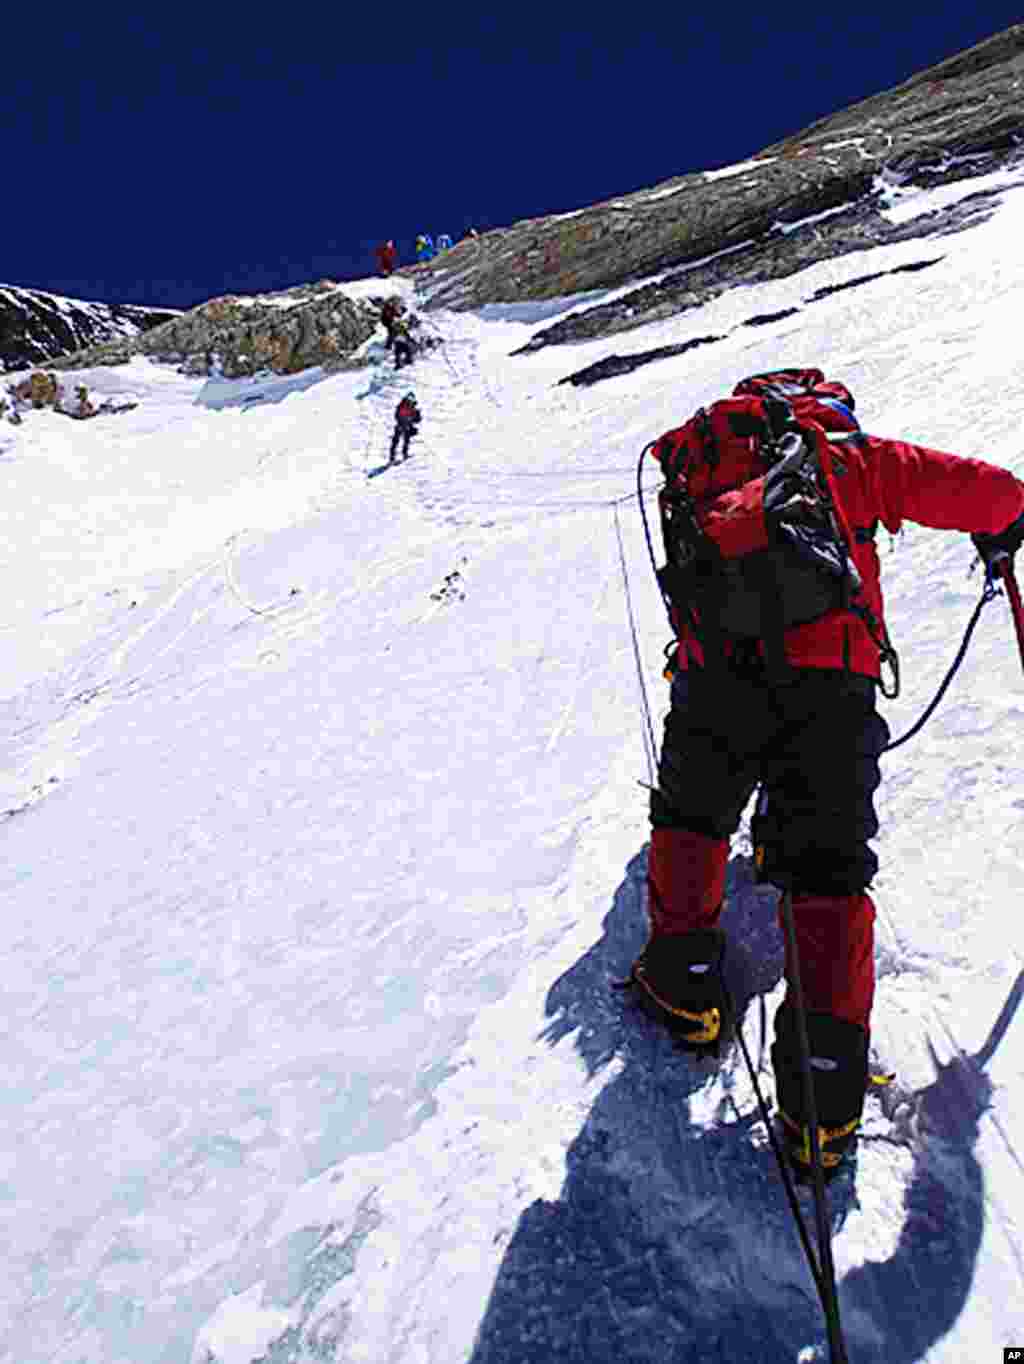 Yuichiro Miura goes through the South Col pass to a camp at 8,000 meters during his attempt to scale the summit of Mount Everest, May 21, 2013. (AP Photo/Miura Dolphins) 